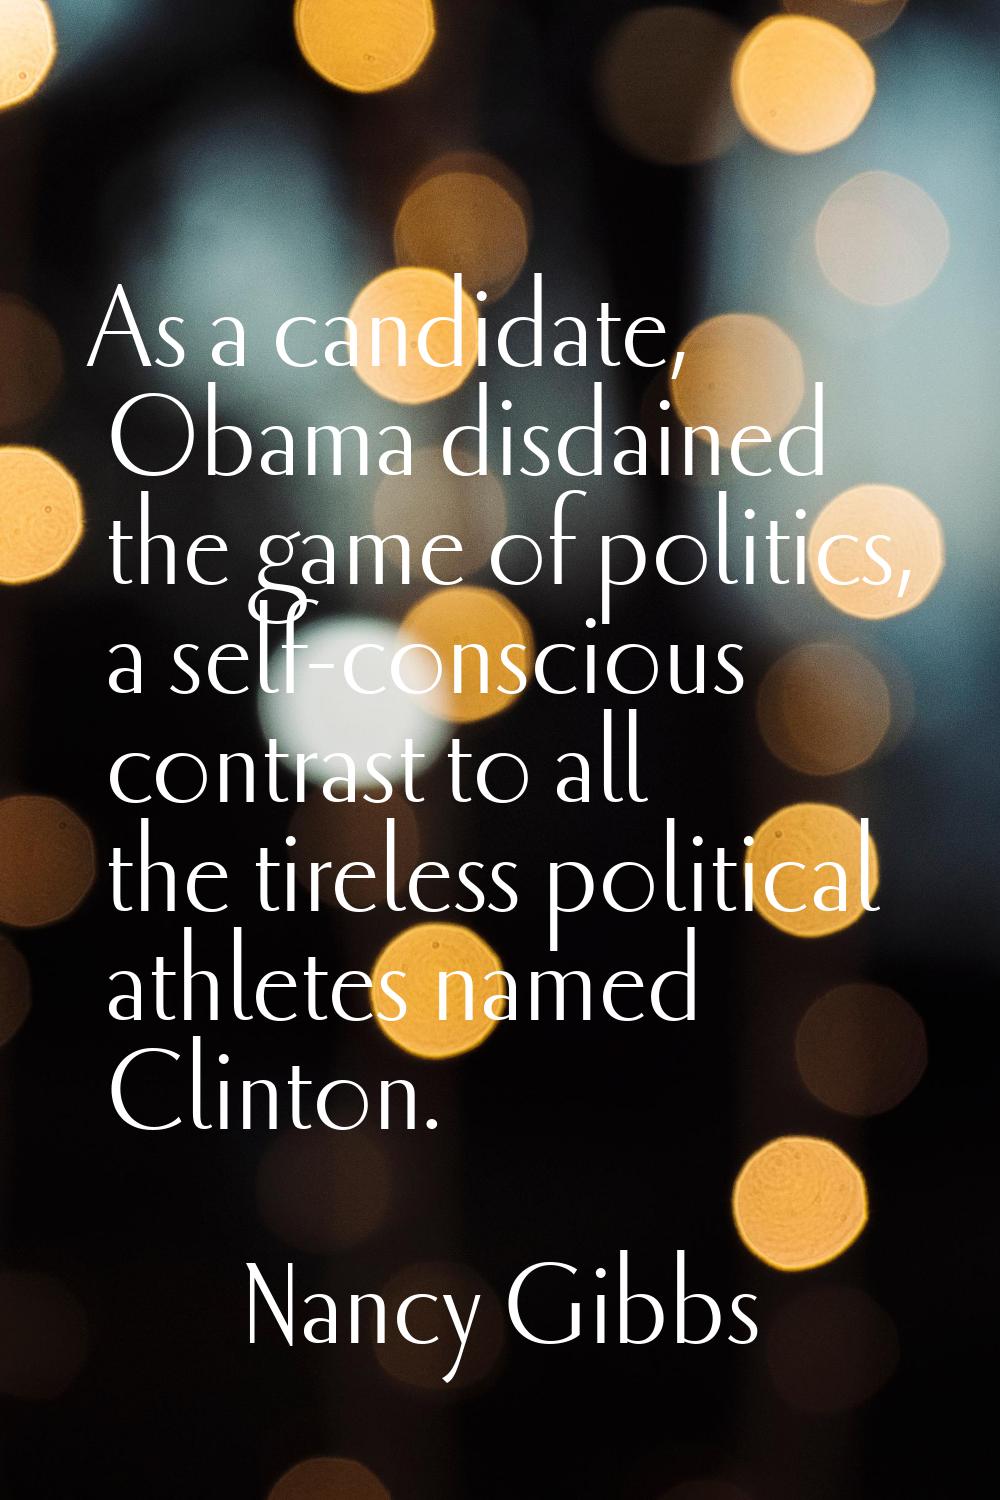 As a candidate, Obama disdained the game of politics, a self-conscious contrast to all the tireless